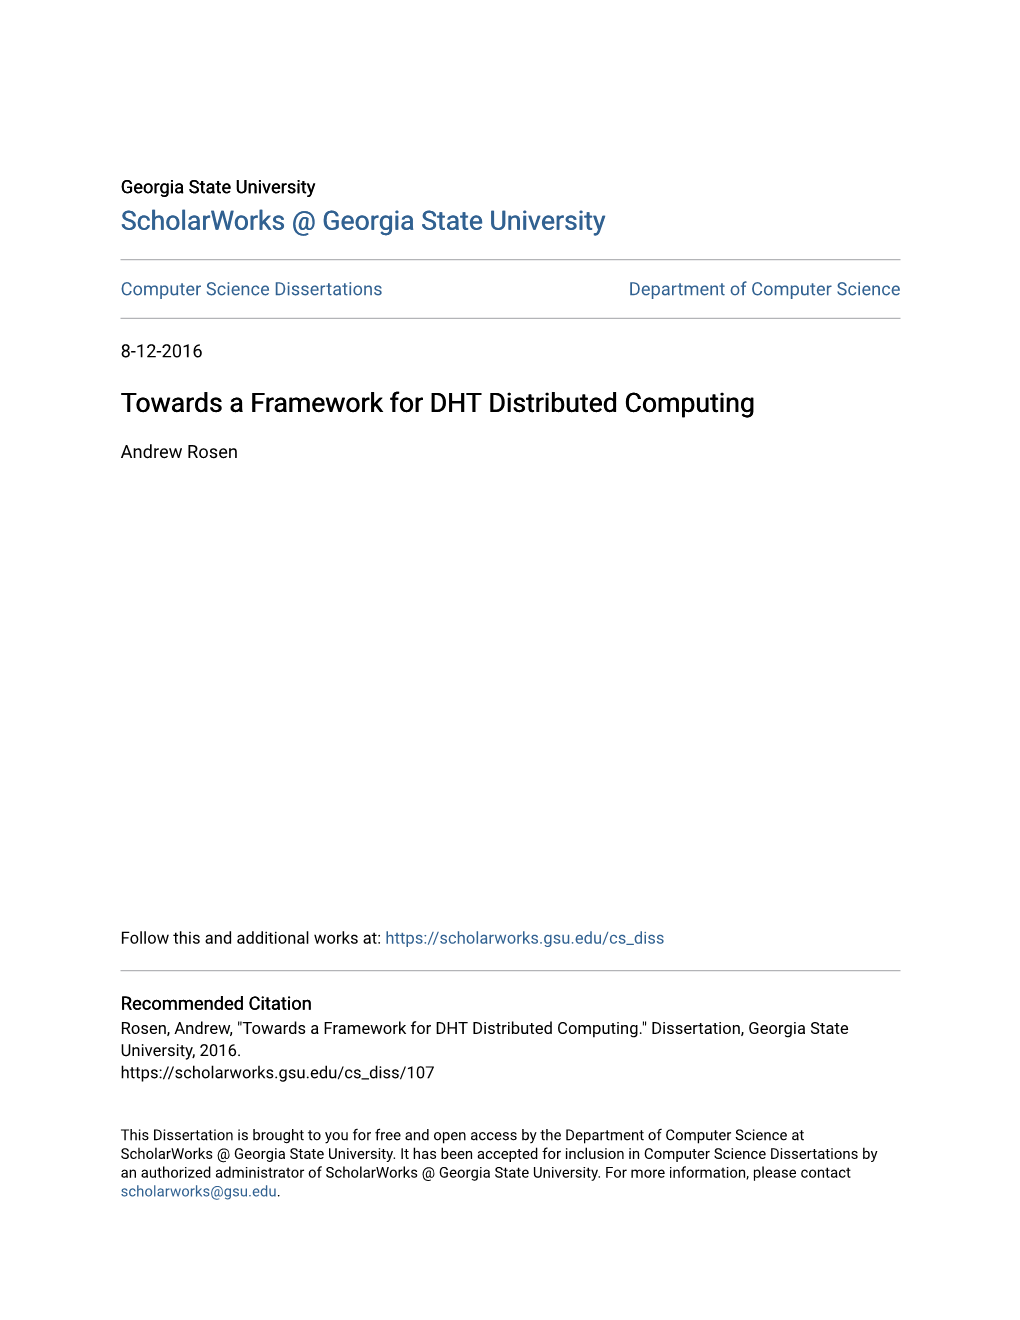 Towards a Framework for DHT Distributed Computing